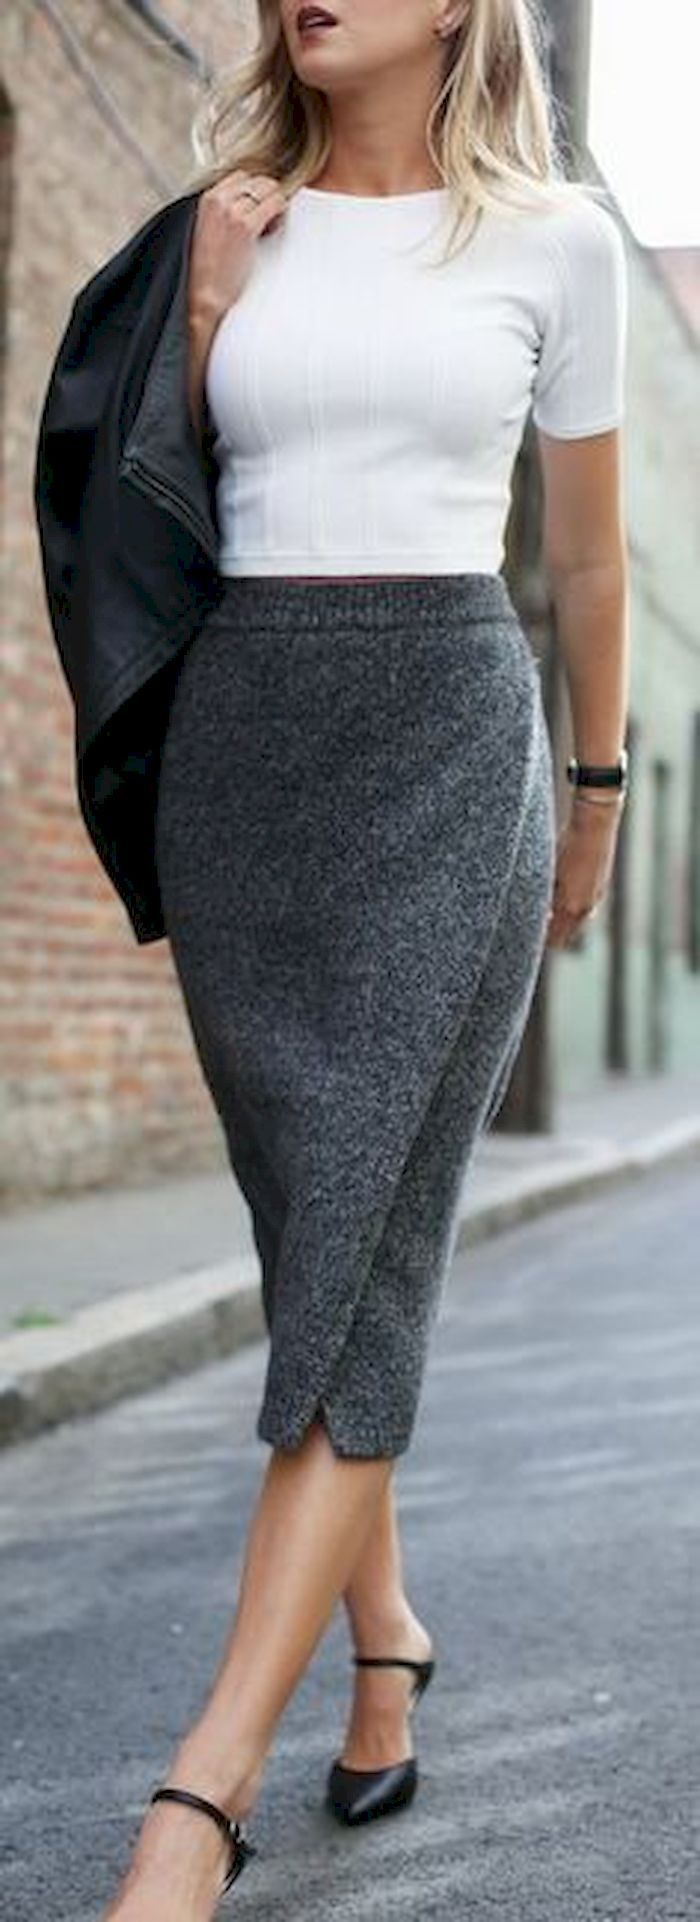 Grey pencil skirt outfit winter: Casual Winter Outfit,  winter outfits,  Pencil skirt,  Wrap Skirt  